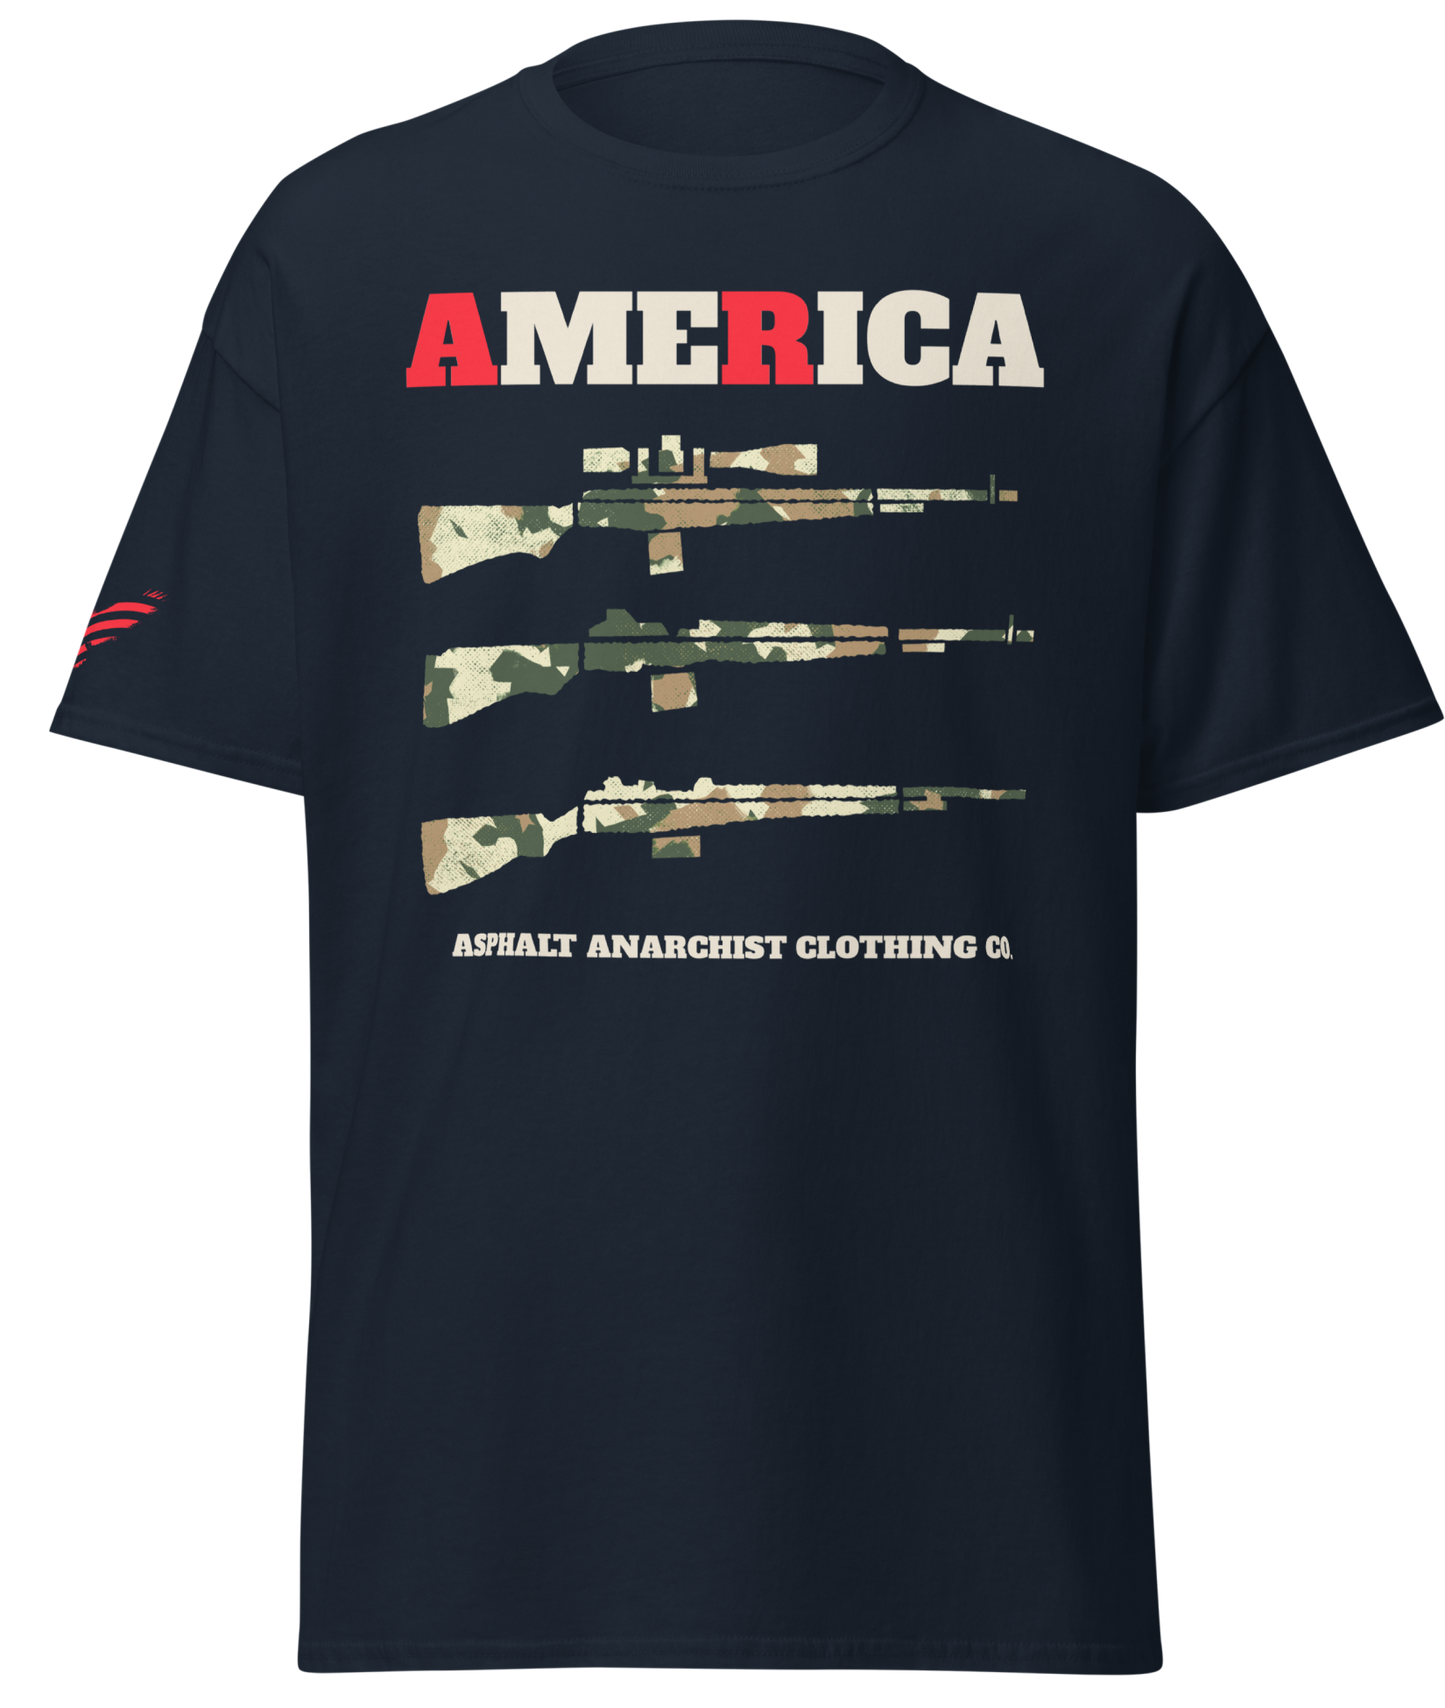 The AR America Tee from Asphalt Anarchist Clothing Co. HOT ROD KUSTOM KULTURE APPAREL & PRODUCTS